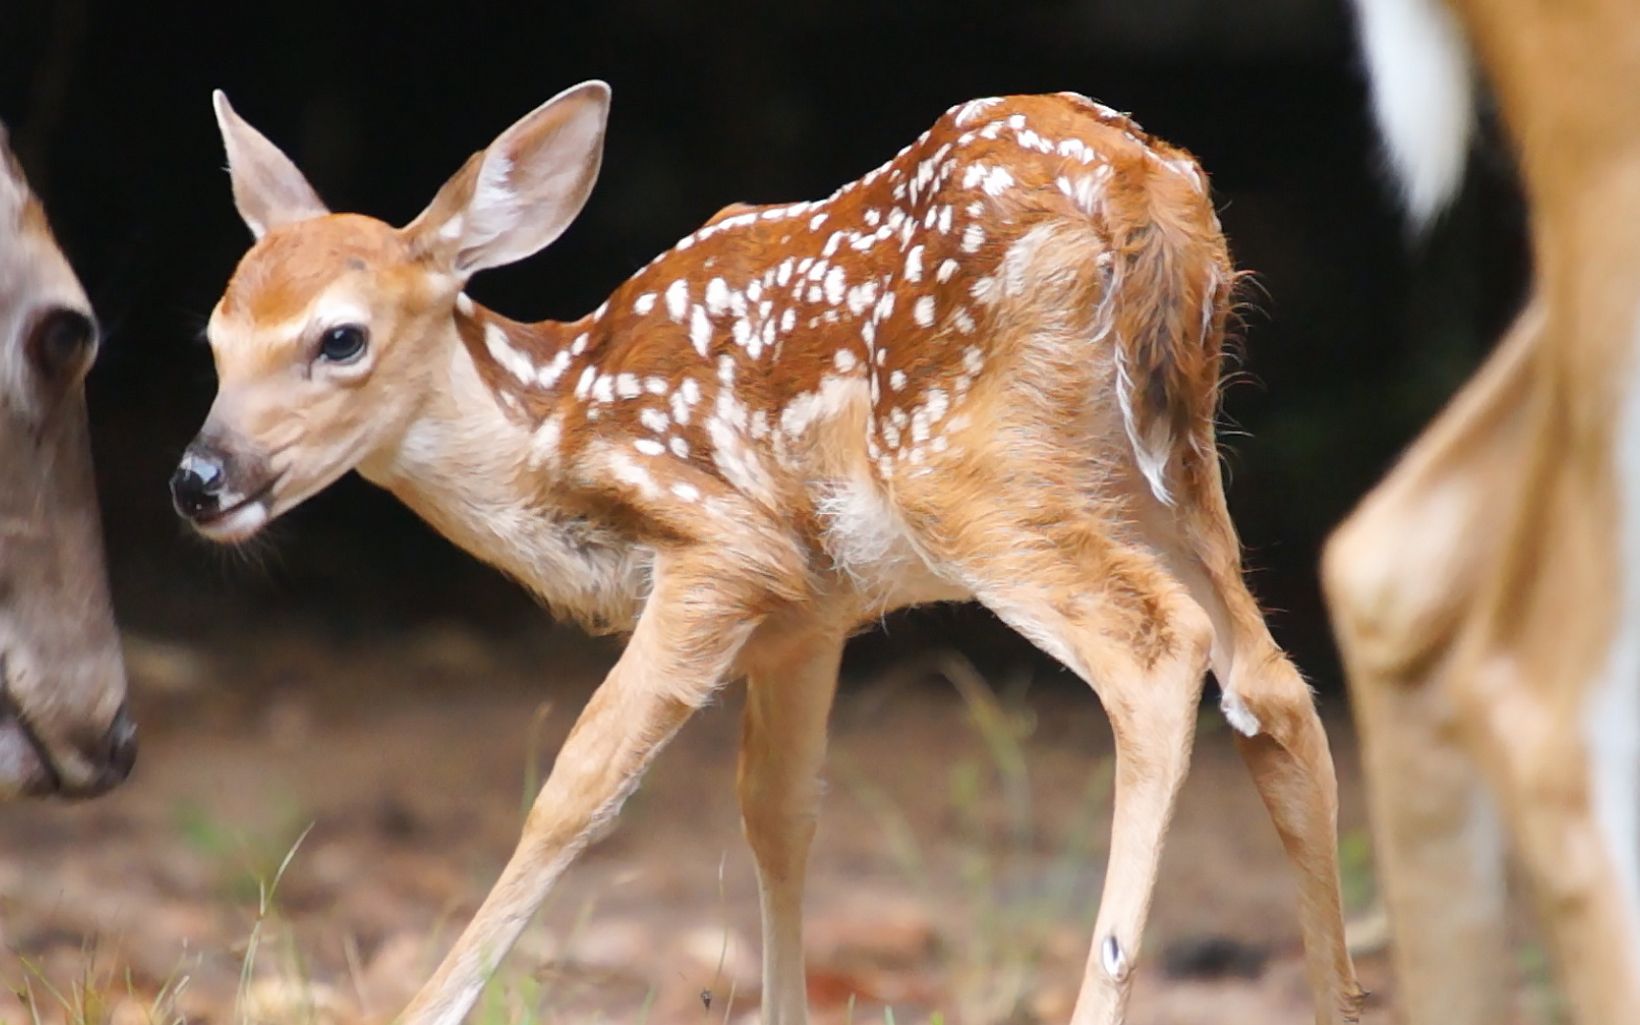 Young white-dotted brown fawn takes awkward steps while its mother stands close by.